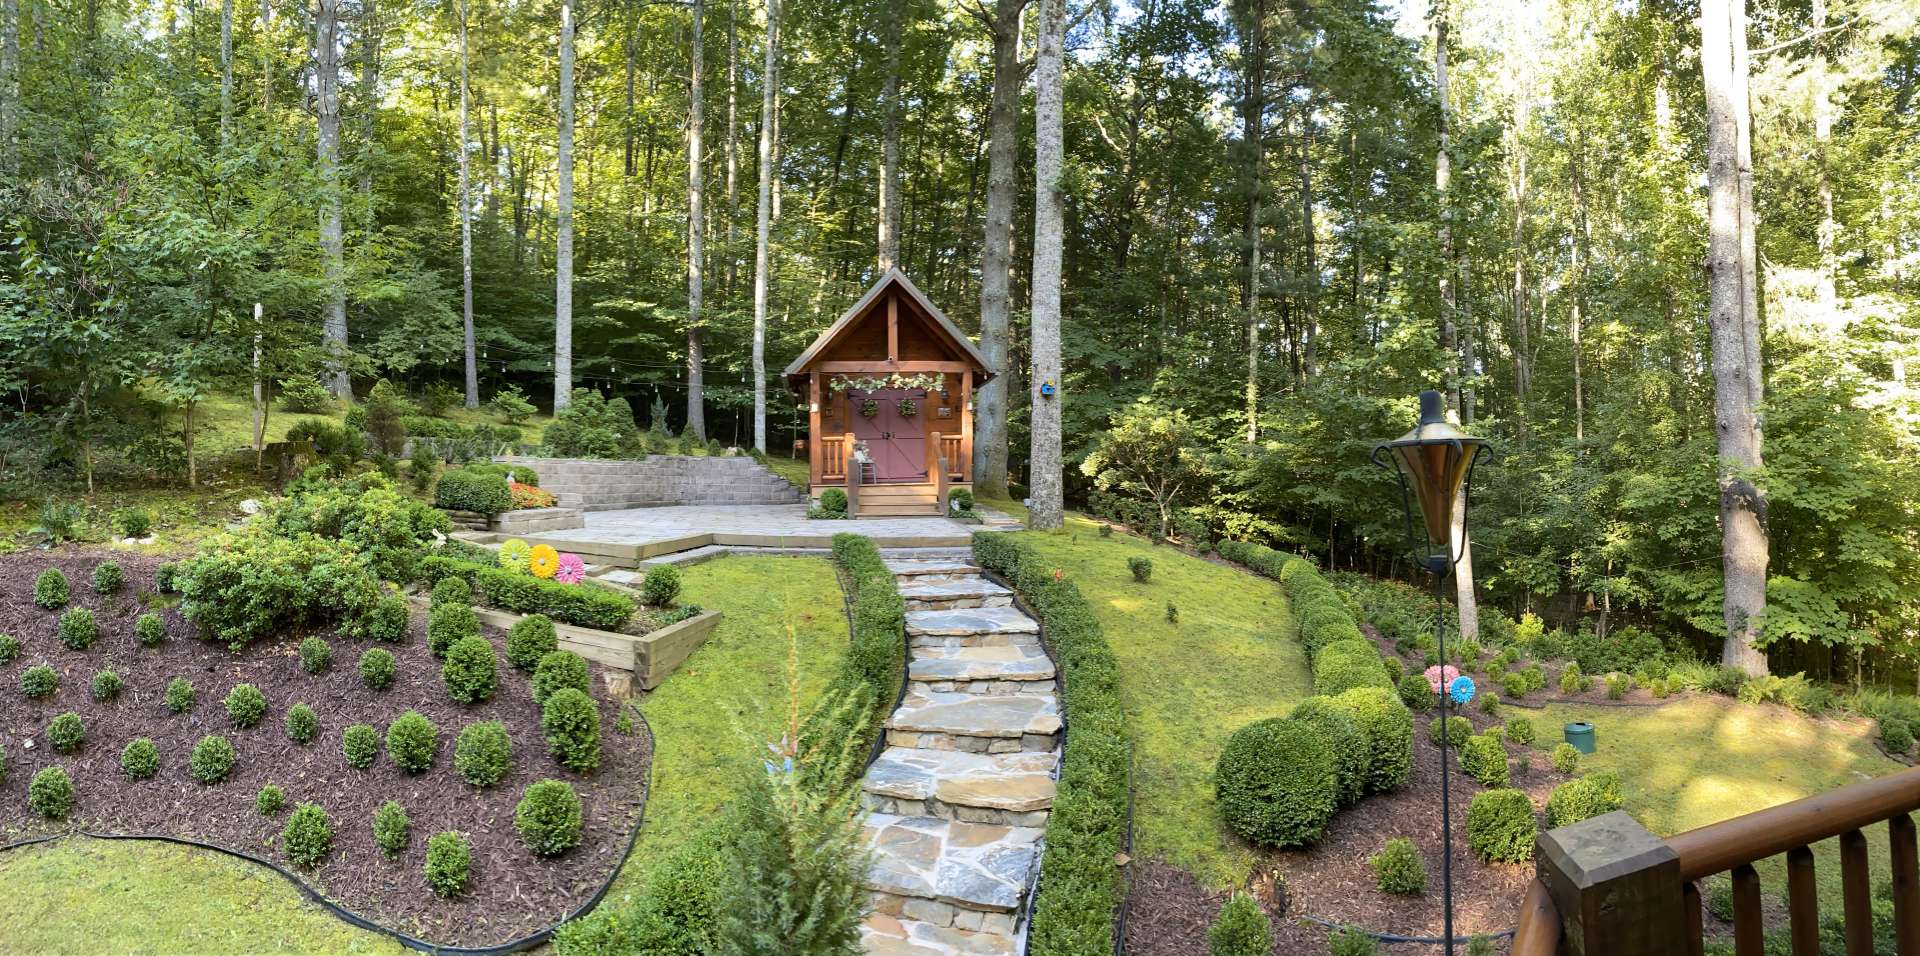 Scenic Garden shed with outdoor entertaining patio!